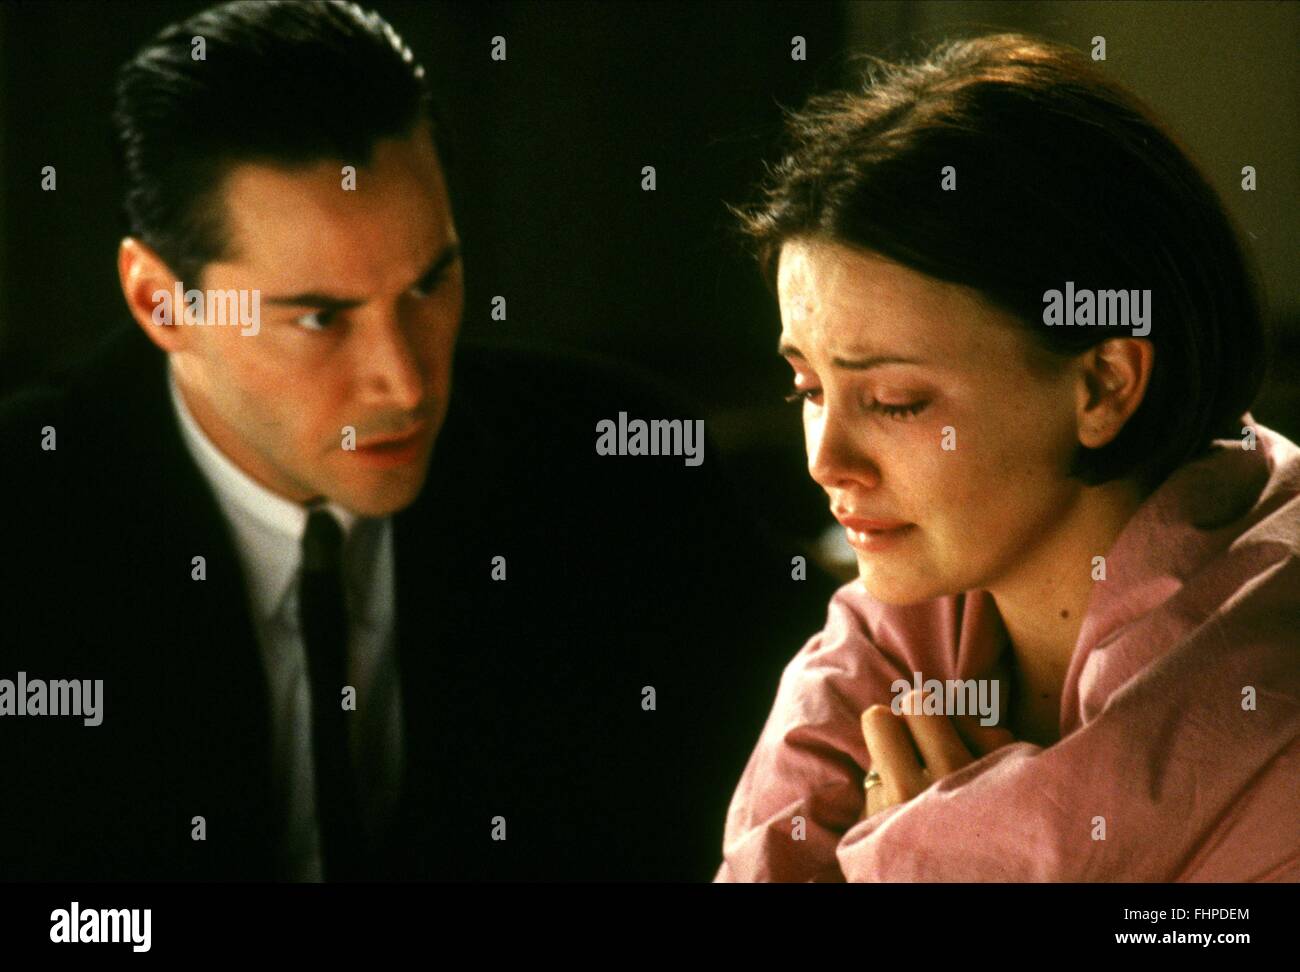 Keanu Reeves Charlize Theron The Devil S Advocate 1997 Stock Photo